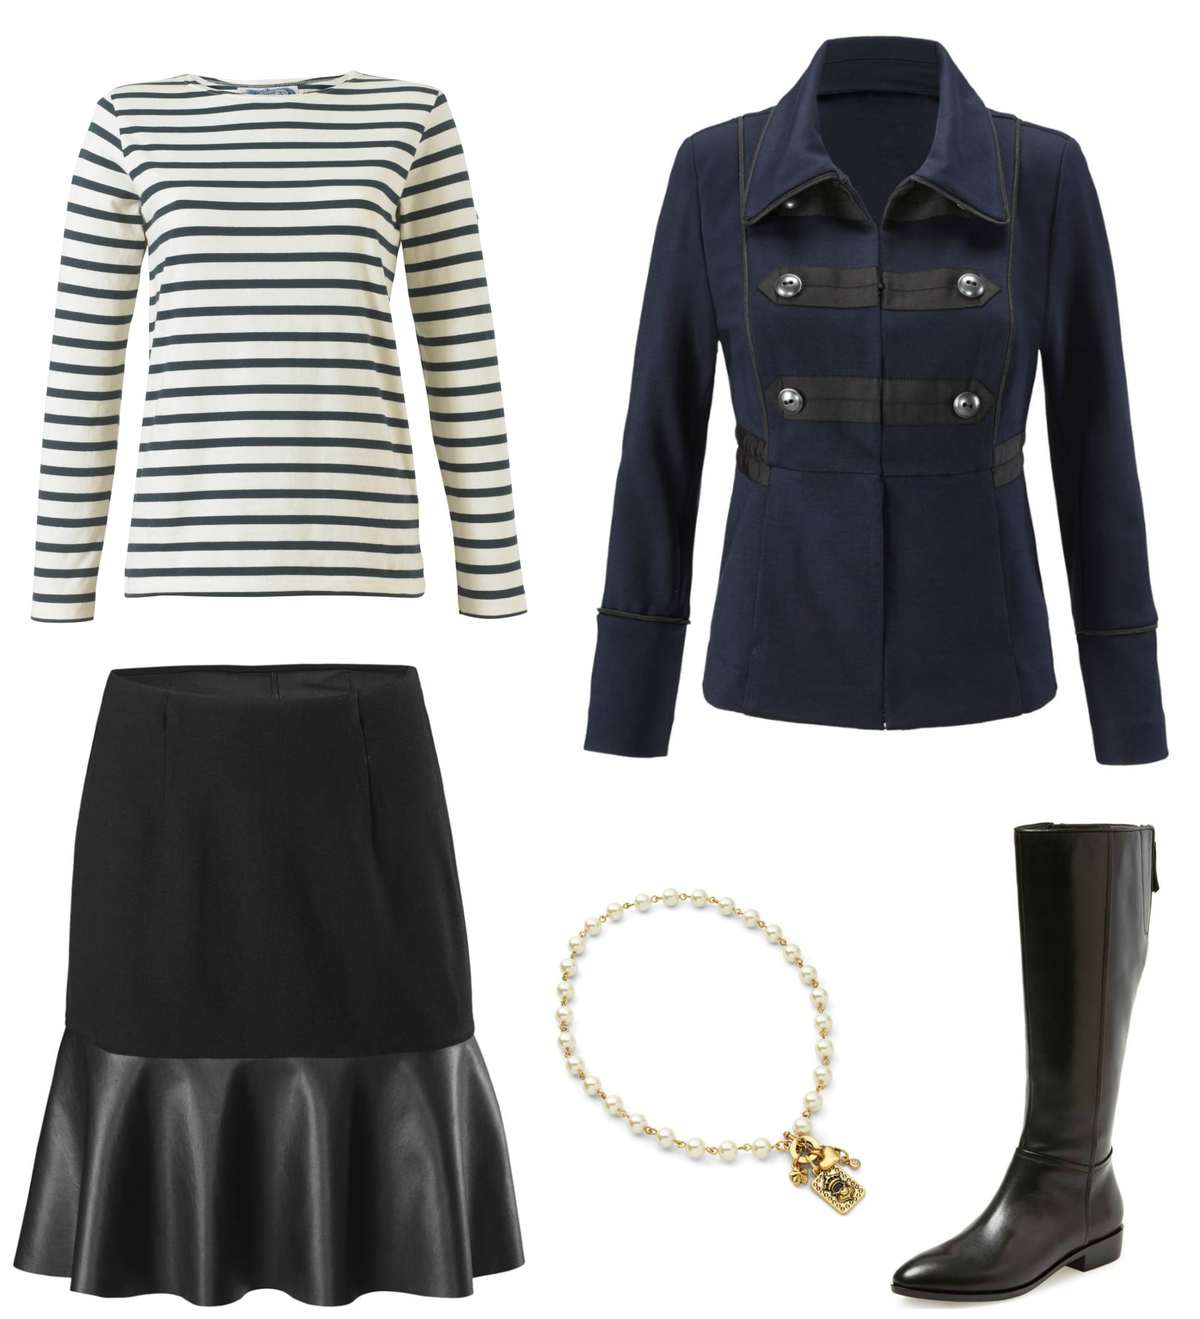 the cabi In The Band jacket styled with the cabi Flip Skirt, a Breton tee, and Naturalizer Winnie riding boots